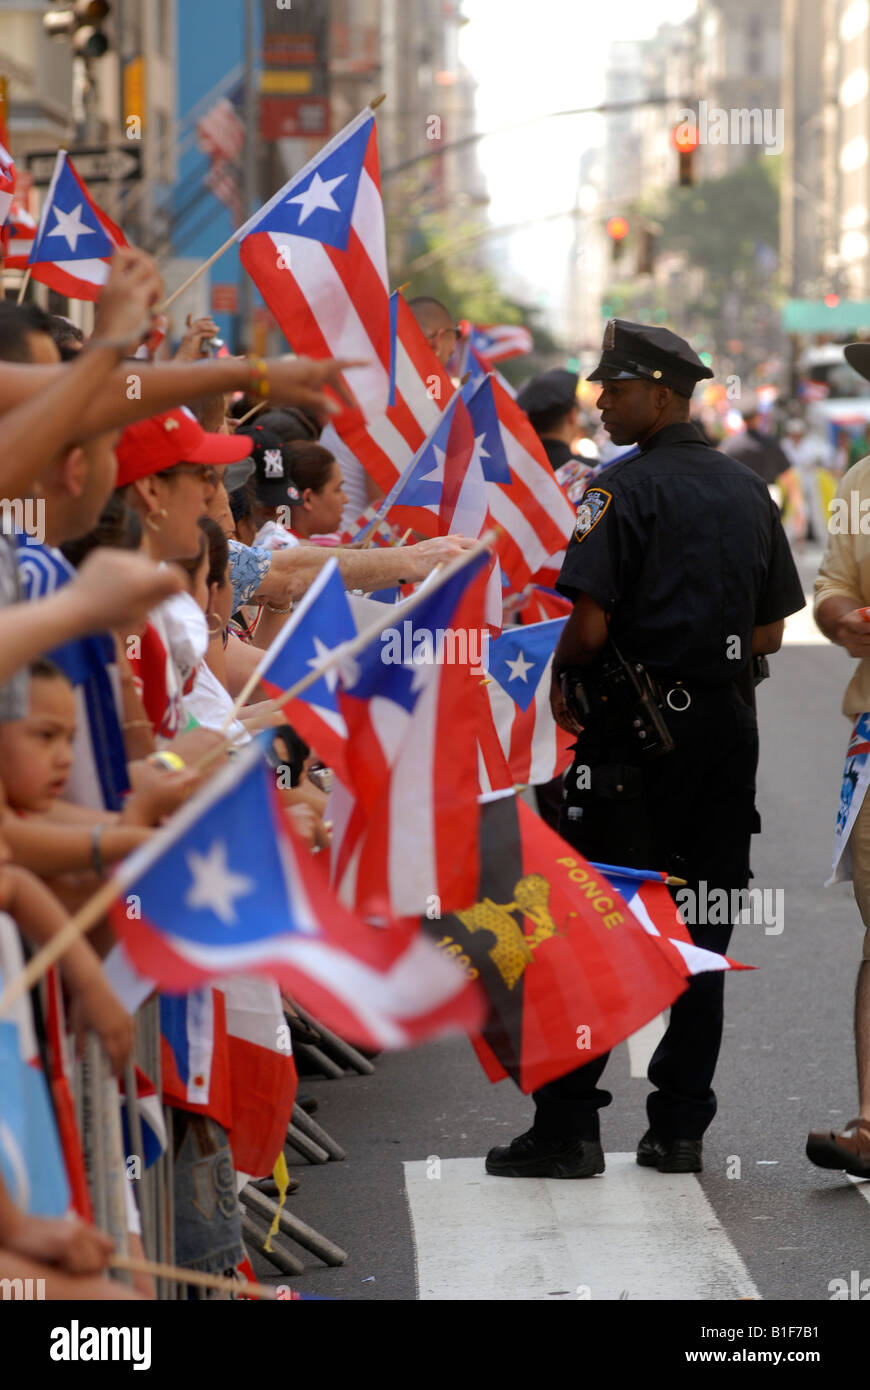 Police watch spectators at the 13th Annual National Puerto Rican Day Parade in New York on Fifth Avenue Stock Photo